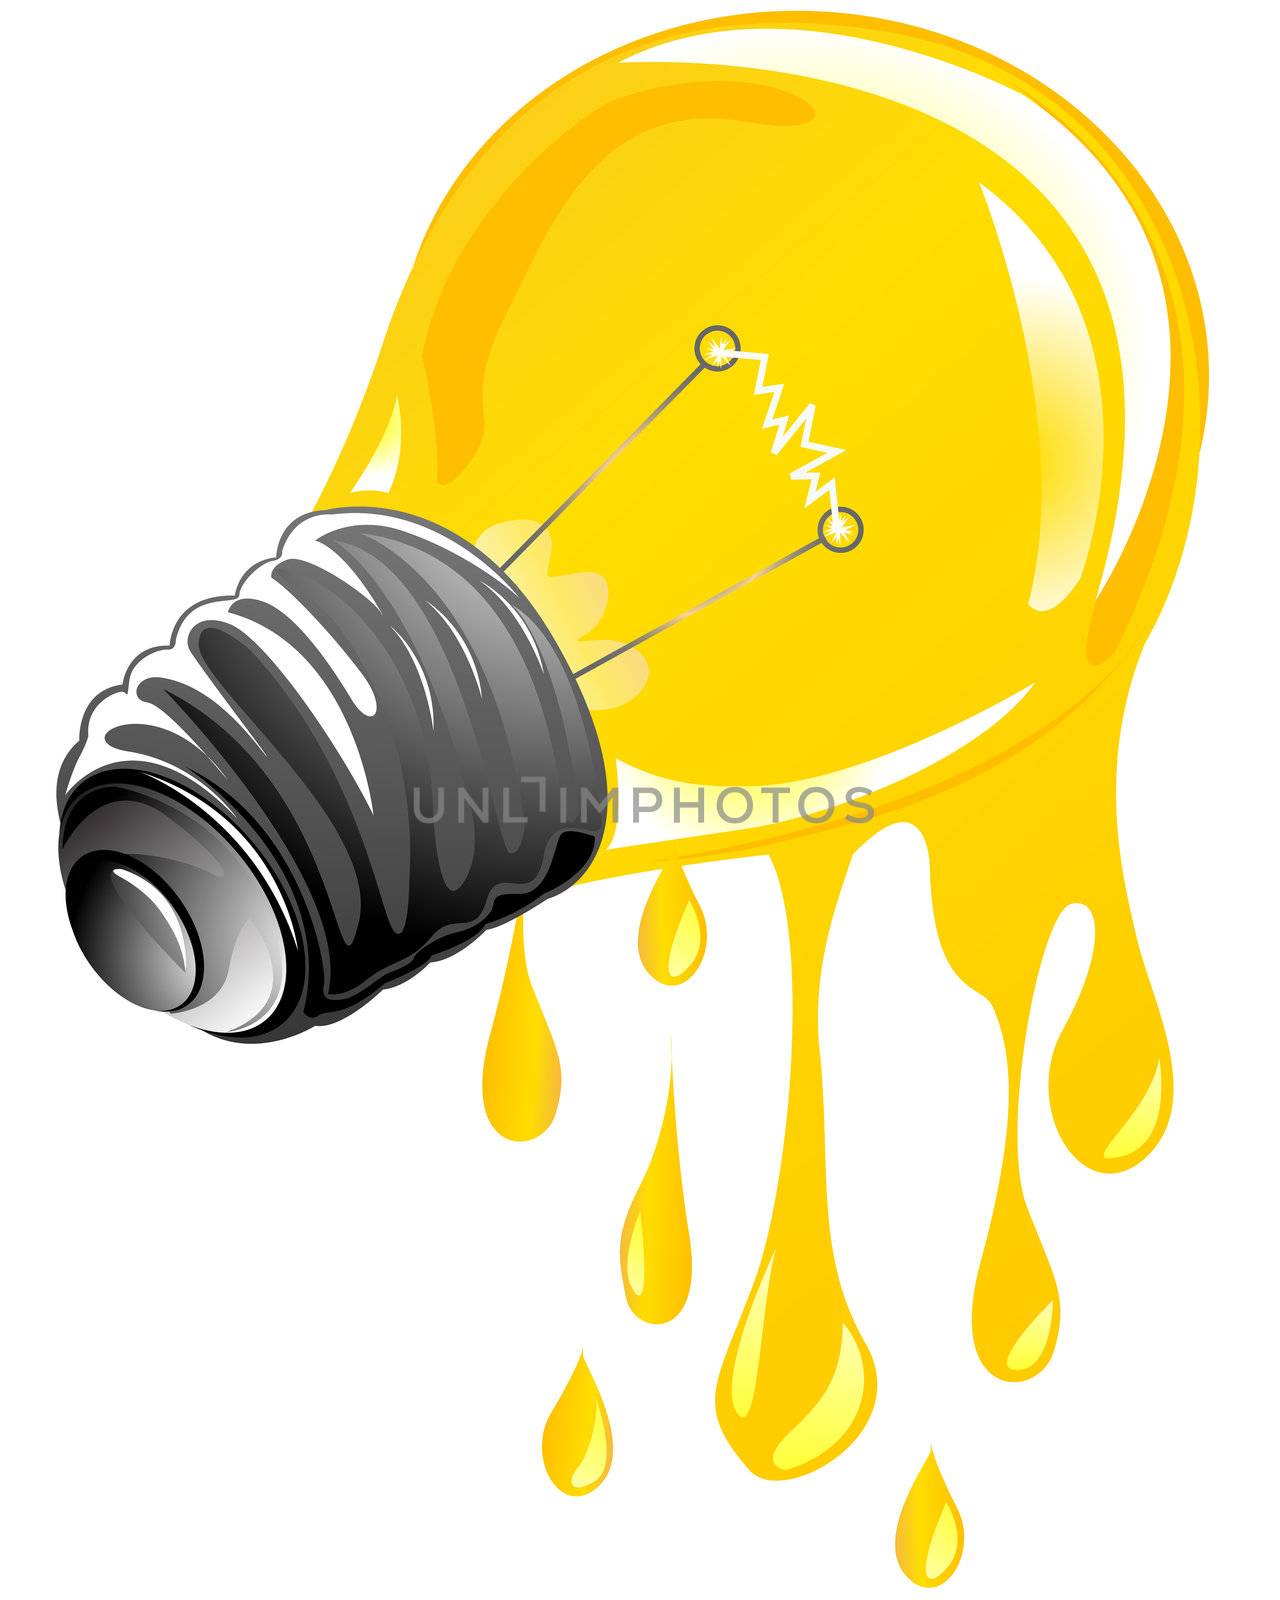 dripping energy light bulb. Isolated and grouped objects over white background